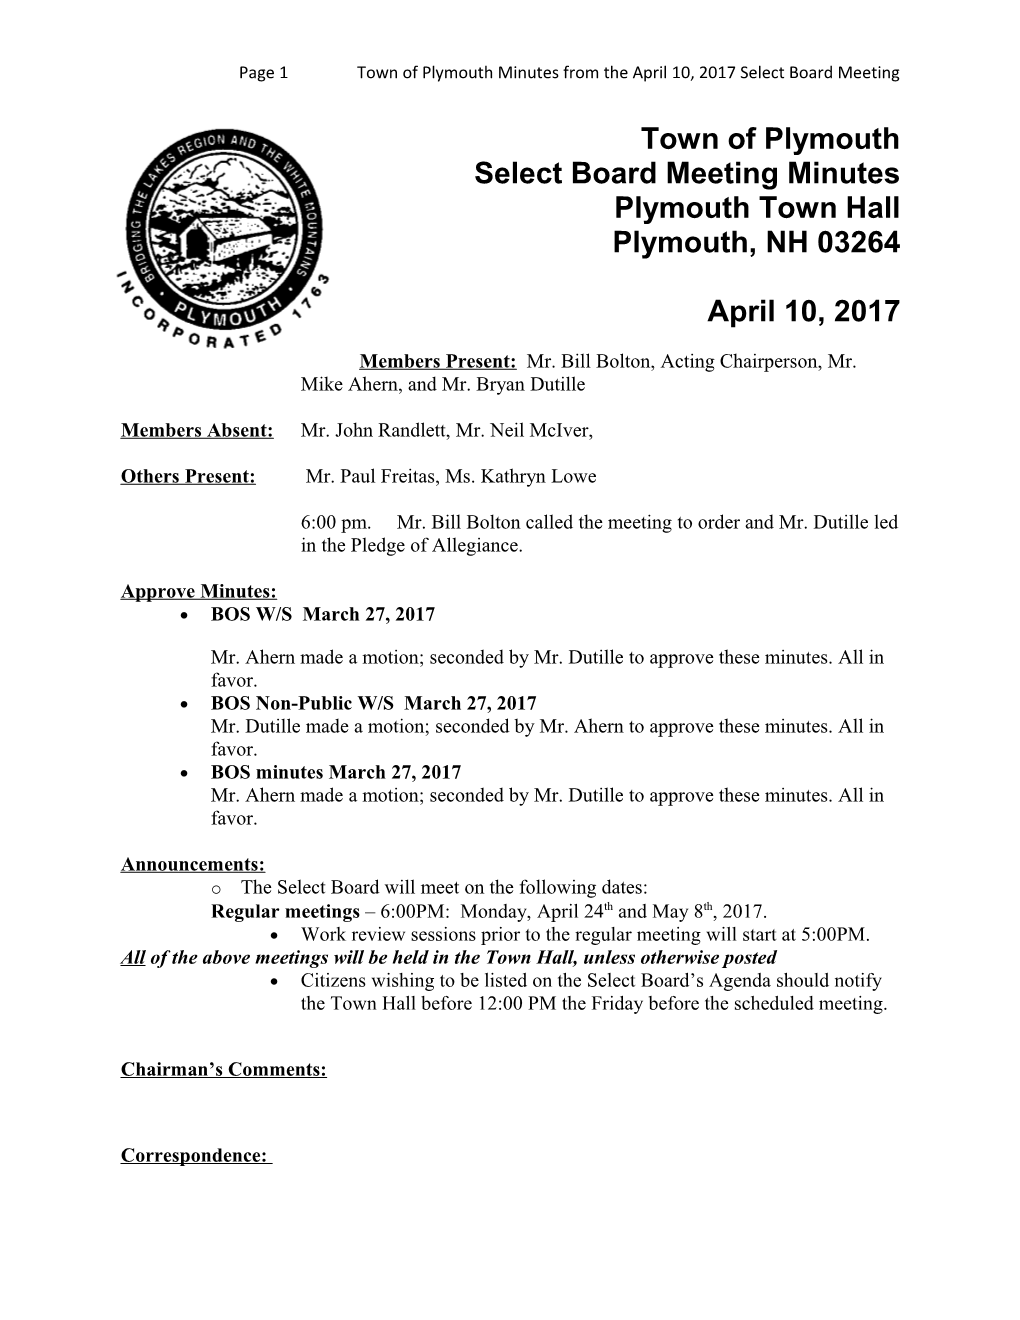 Page 1Town of Plymouth Minutes from Theapril 10, 2017 Select Board Meeting